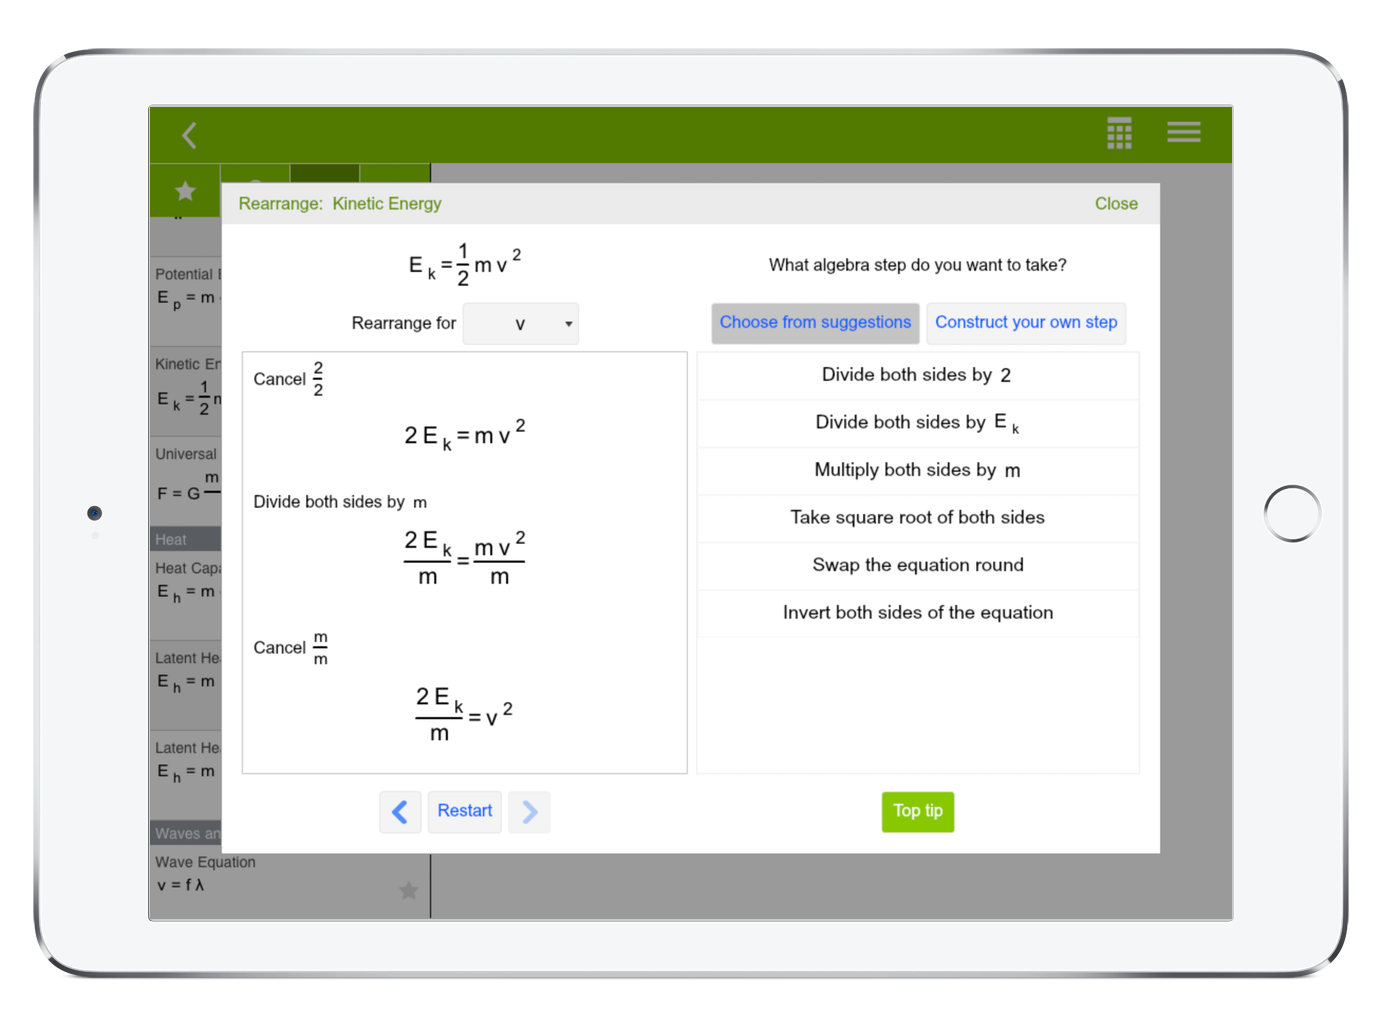 EquationLab's algebra tutor or algebra calculator helps you learn algebra and to rearrange equations in maths and physics. Algebra is a vital skill to learn to succeed and get great results in high school physics and maths.